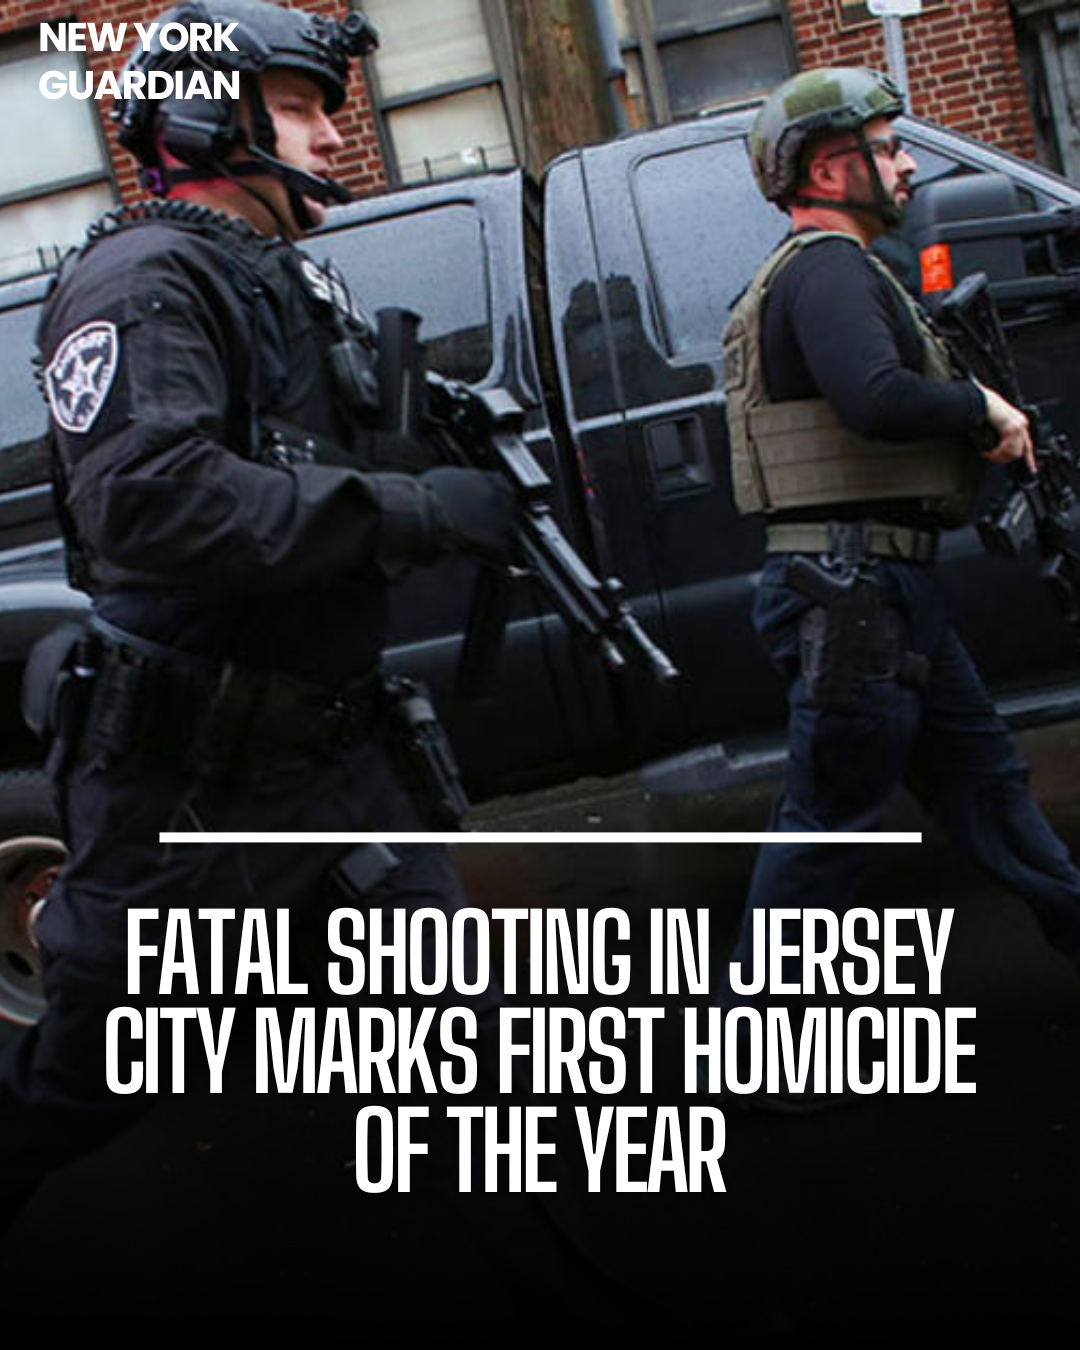 Jersey City, New Jersey, experienced a tragic episode in which one guy died and two others were injured due to gunfire.